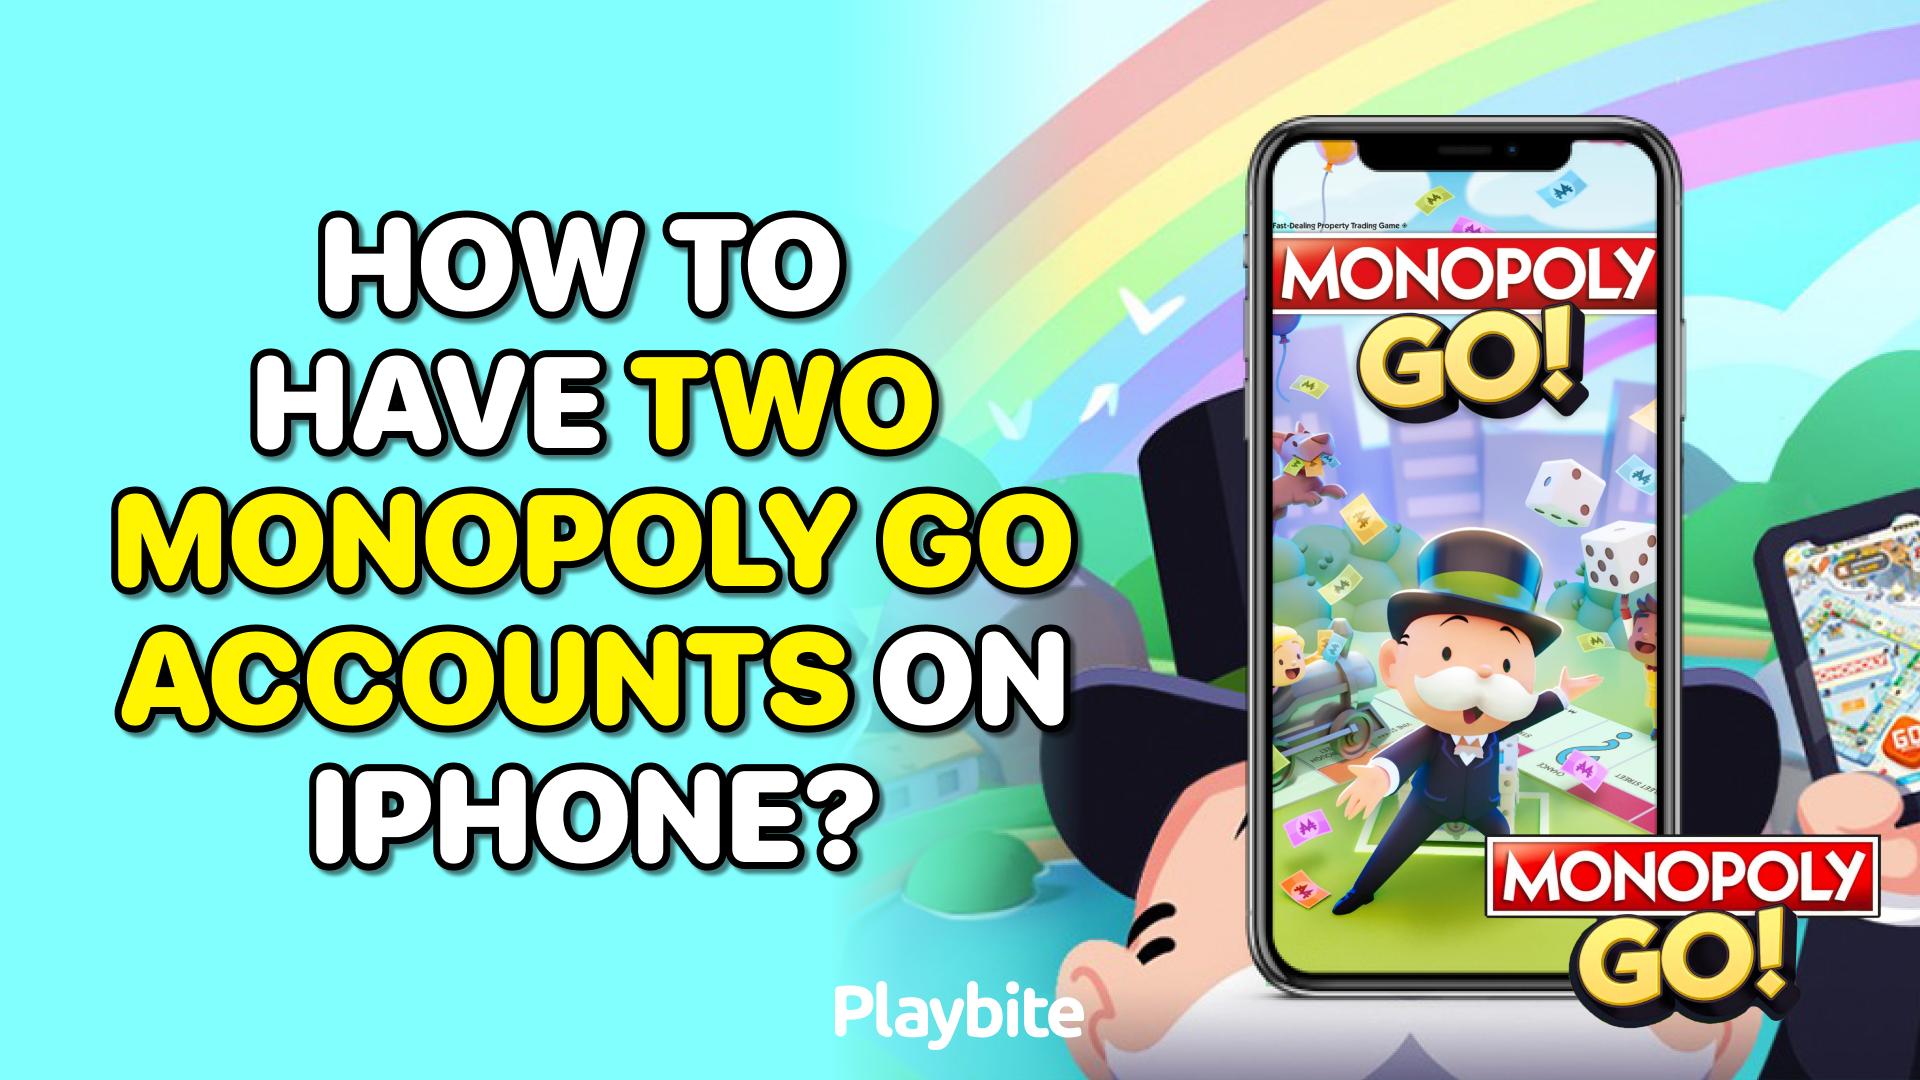 How to Have 2 Monopoly Go Accounts on iPhone?